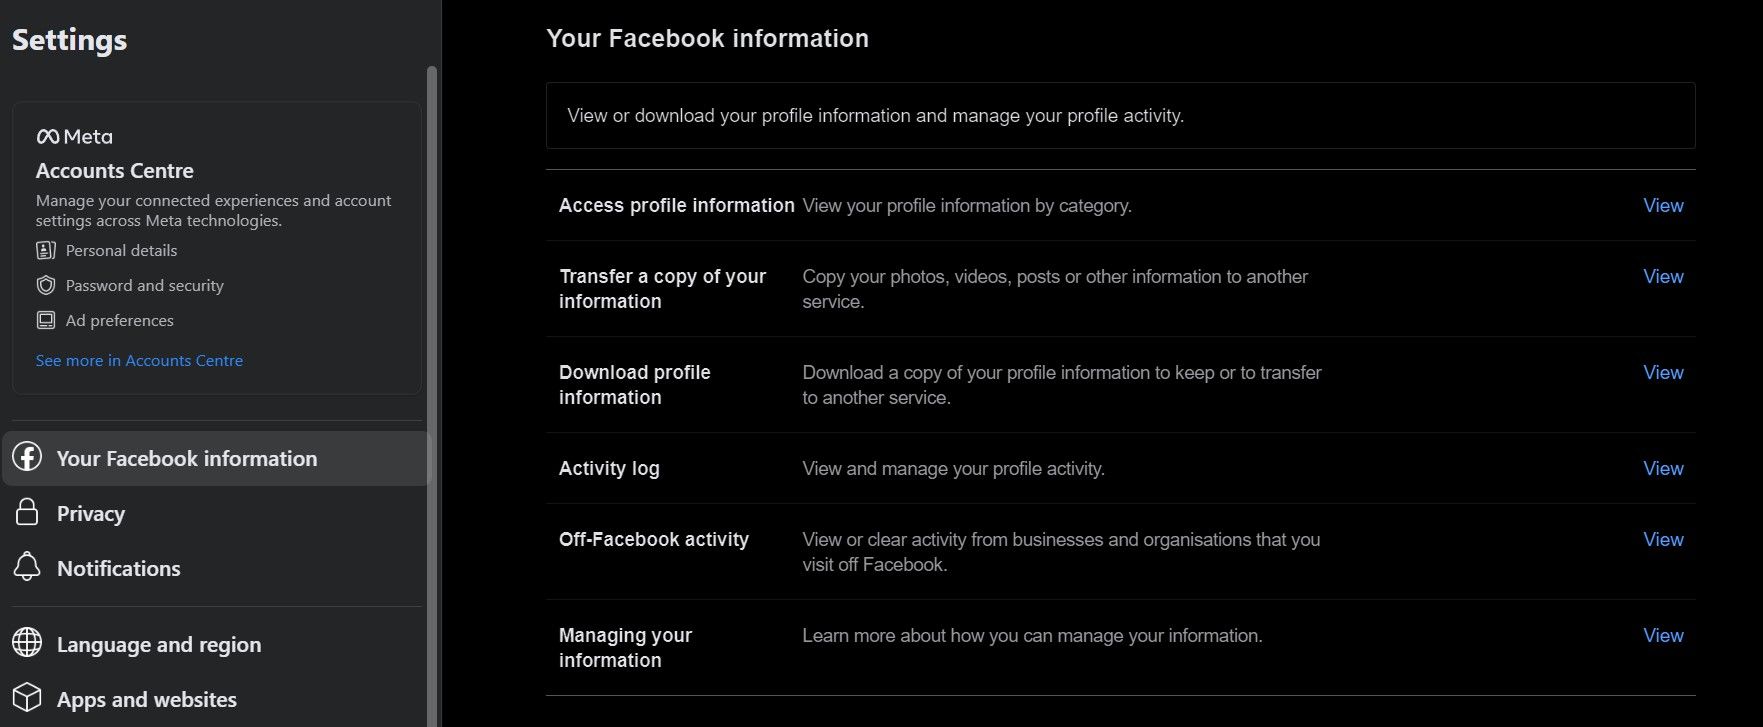 your facebook information page